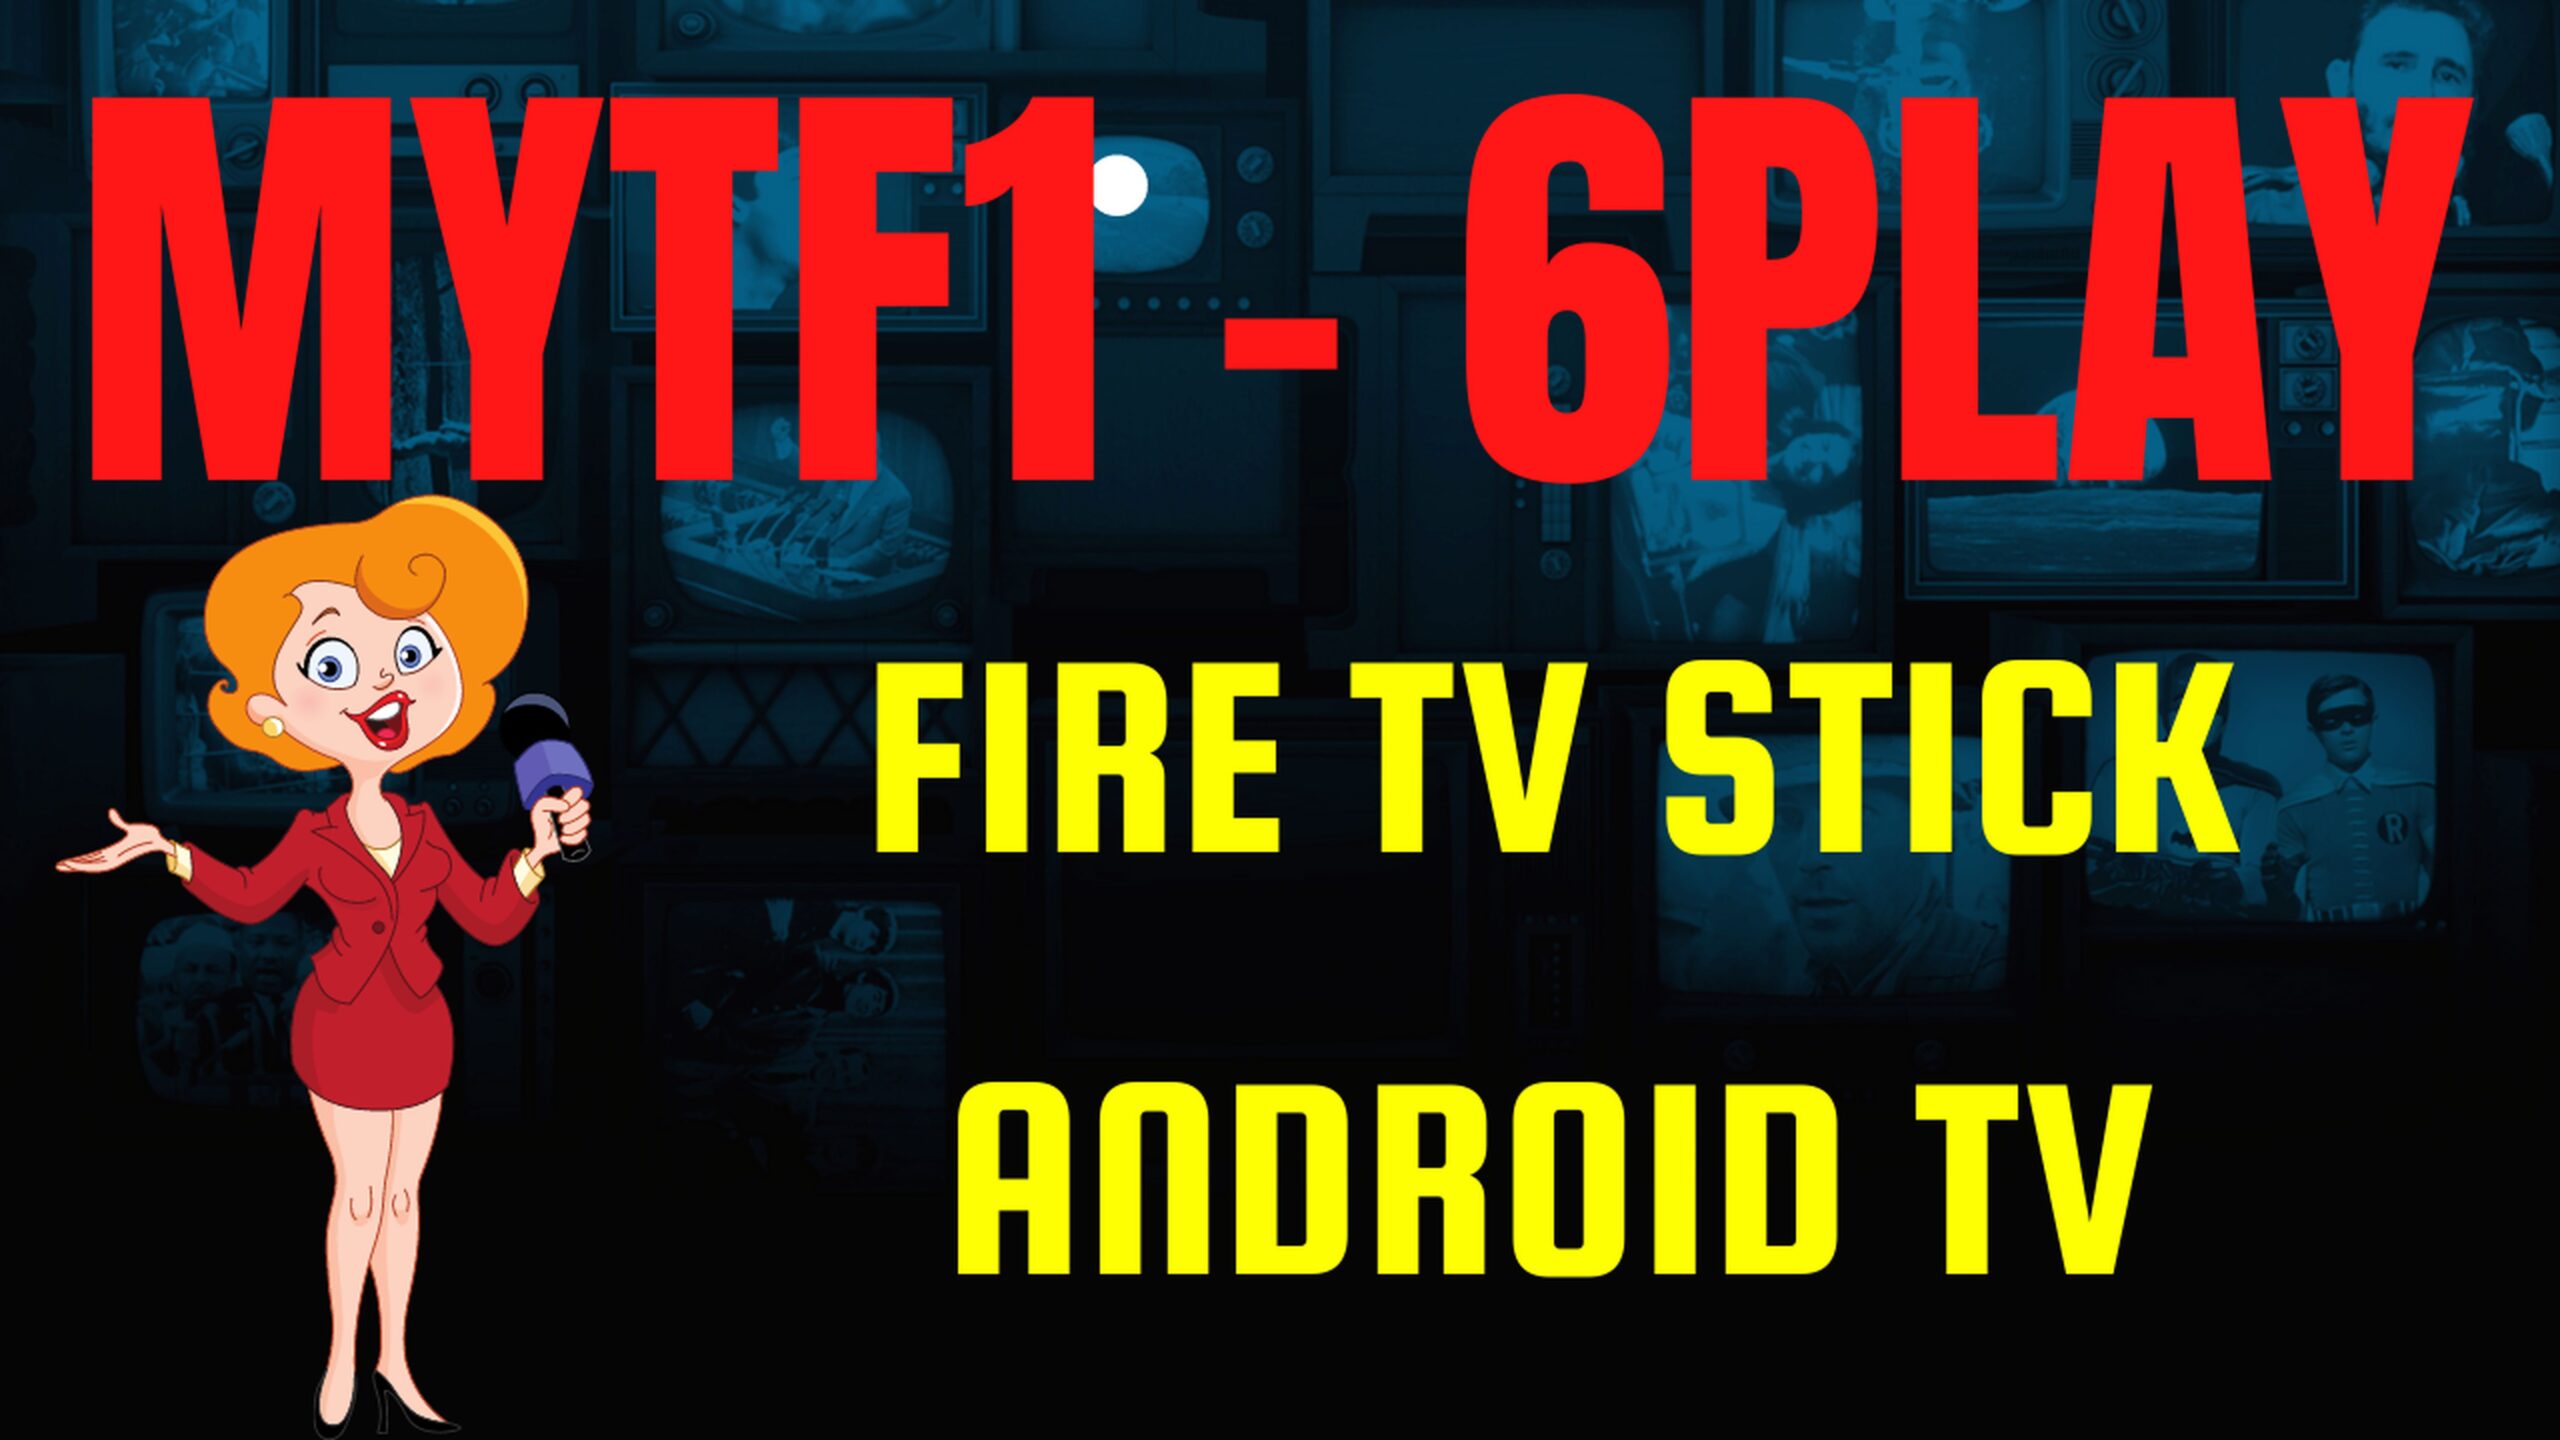 Installer MyTF1 et 6Play (Direct - Replay) sur Fire TV Stick / Android TV 13